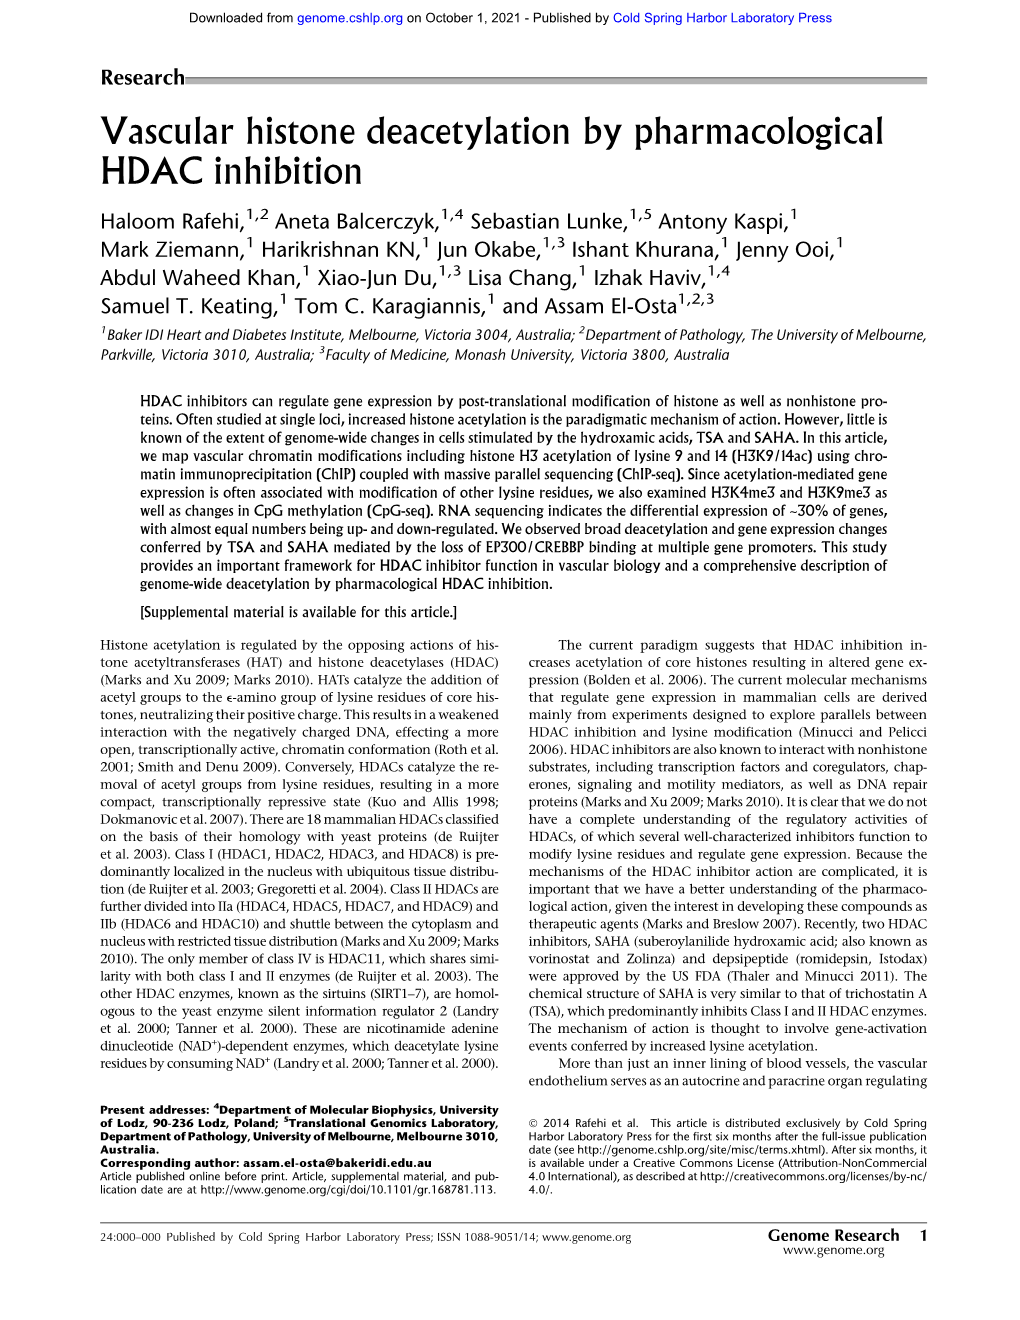 Vascular Histone Deacetylation by Pharmacological HDAC Inhibition